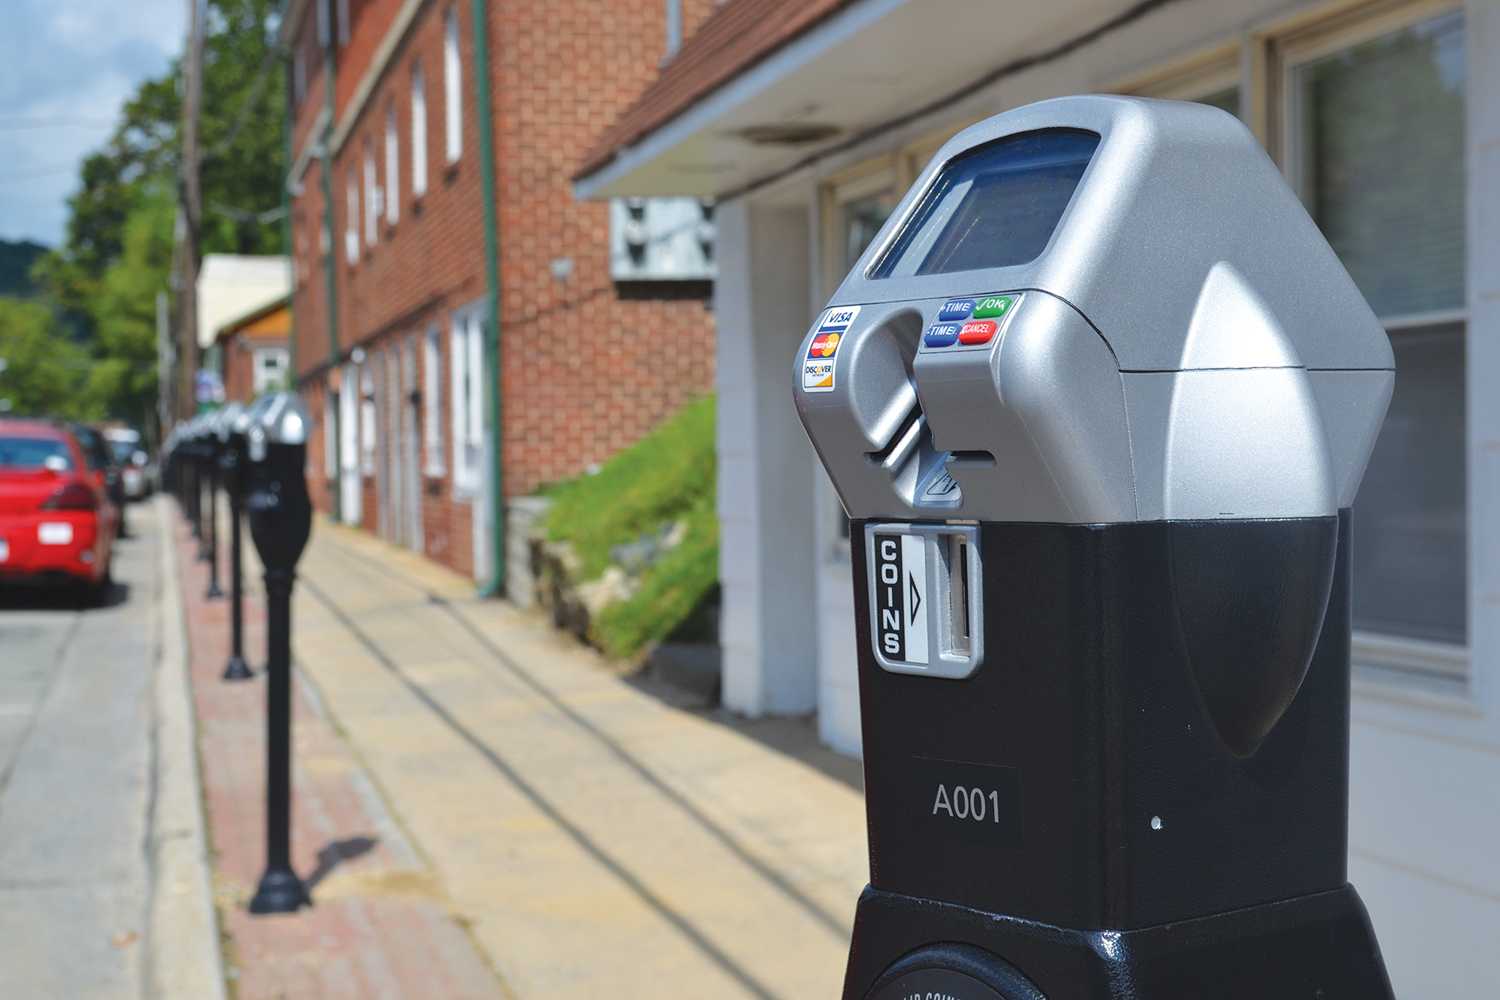 The Town of Boone uses meters and meter attendants to regulate parking downtown.